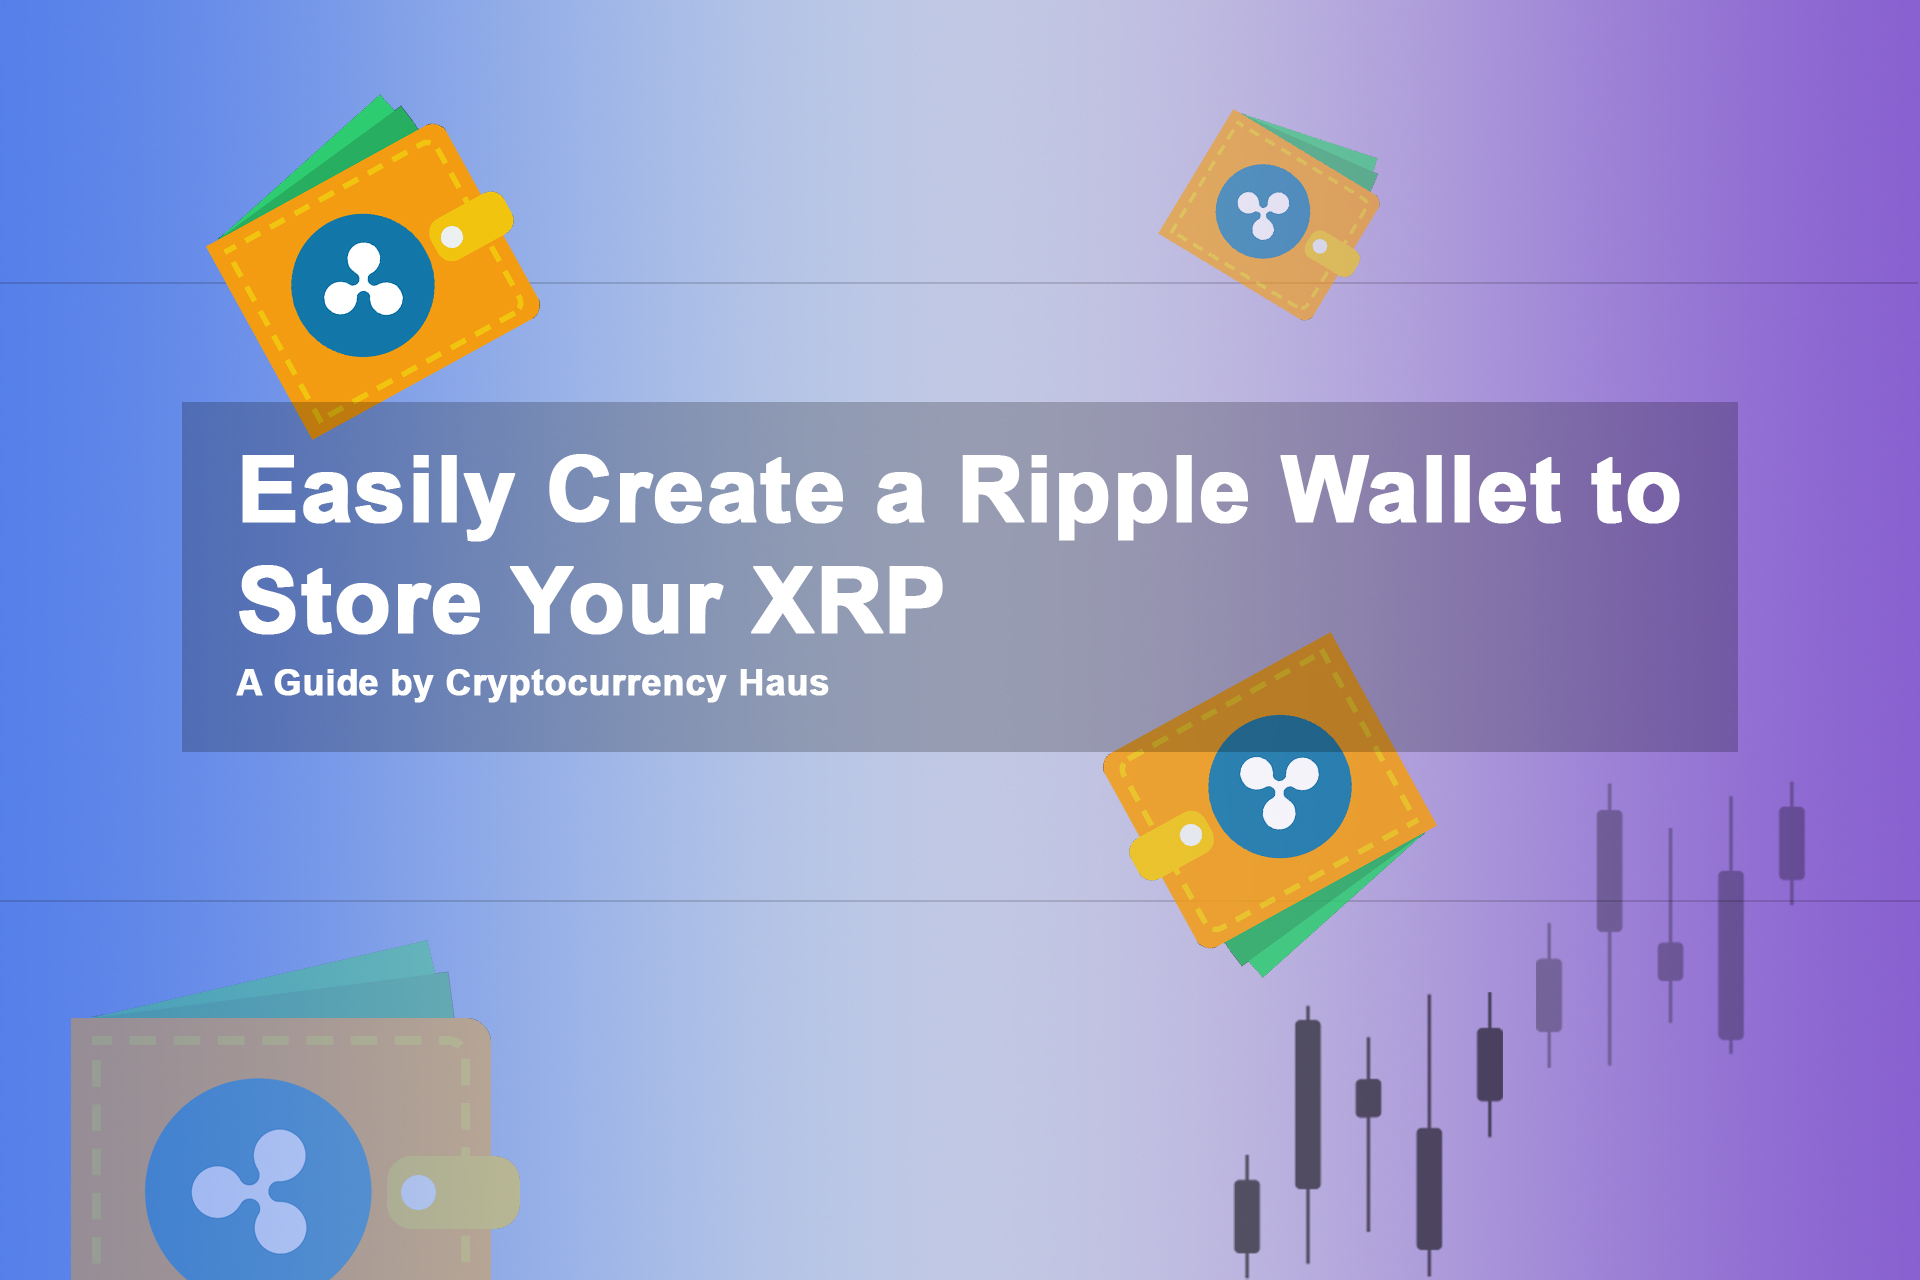 Where can i store my xrp safely